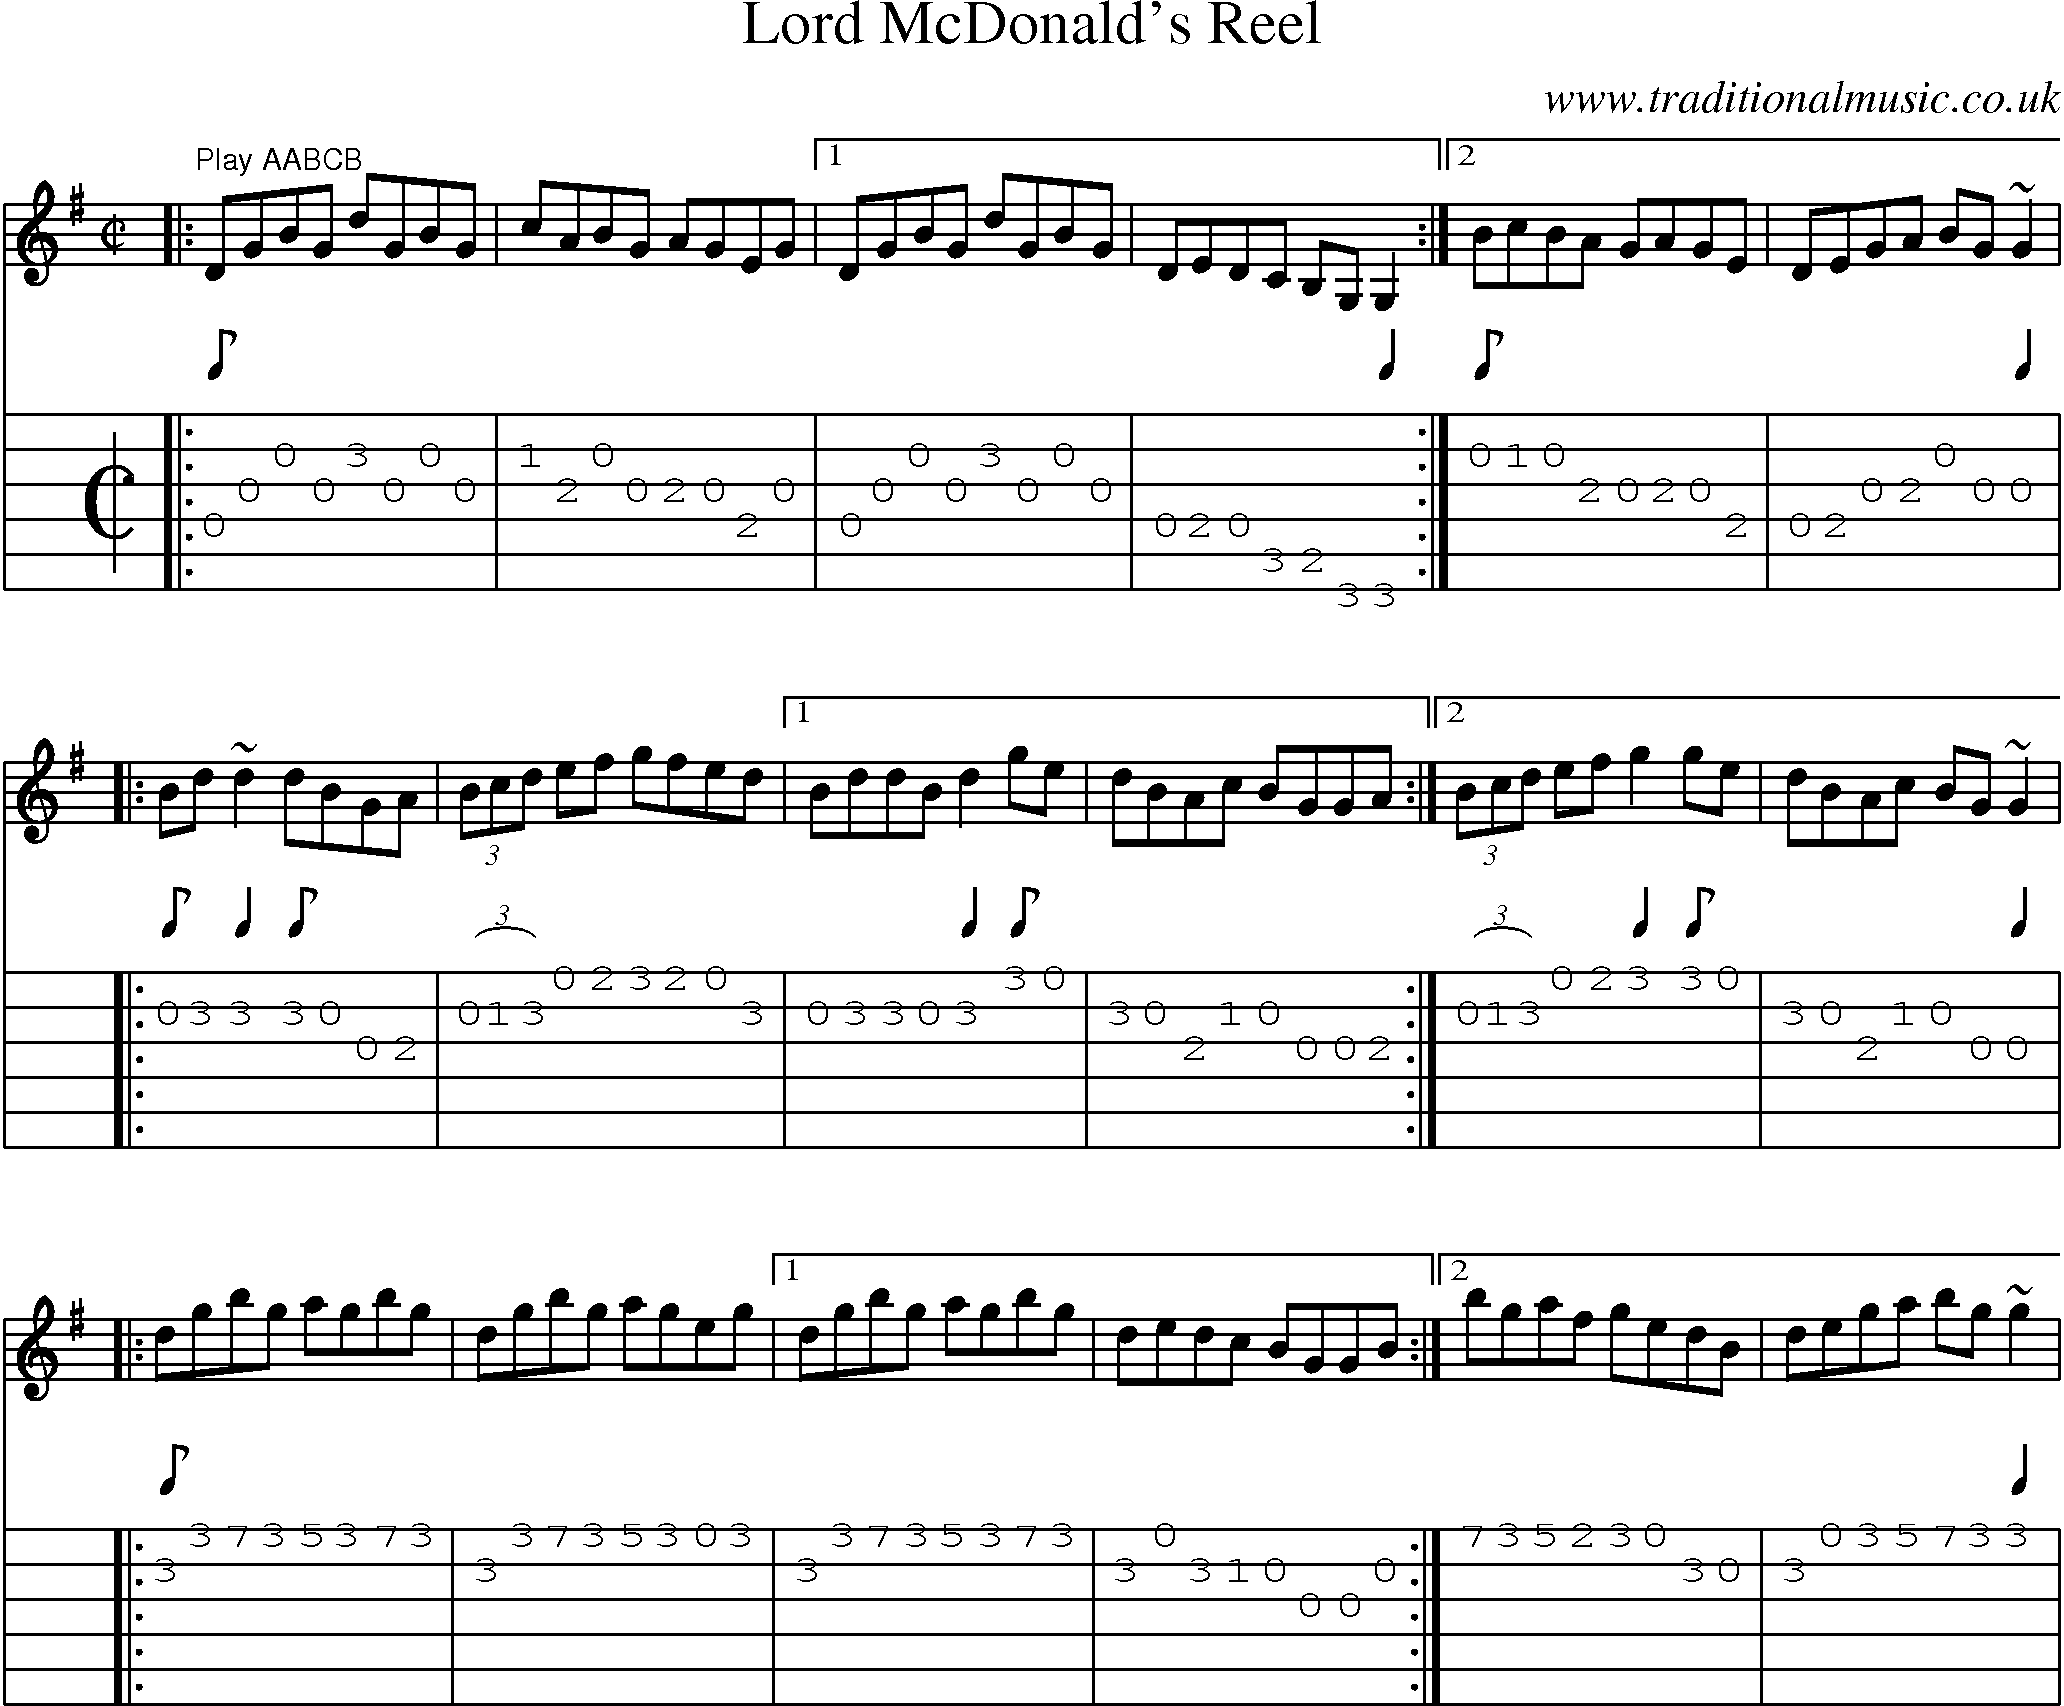 Music Score and Guitar Tabs for Lord Mcdonalds Reel